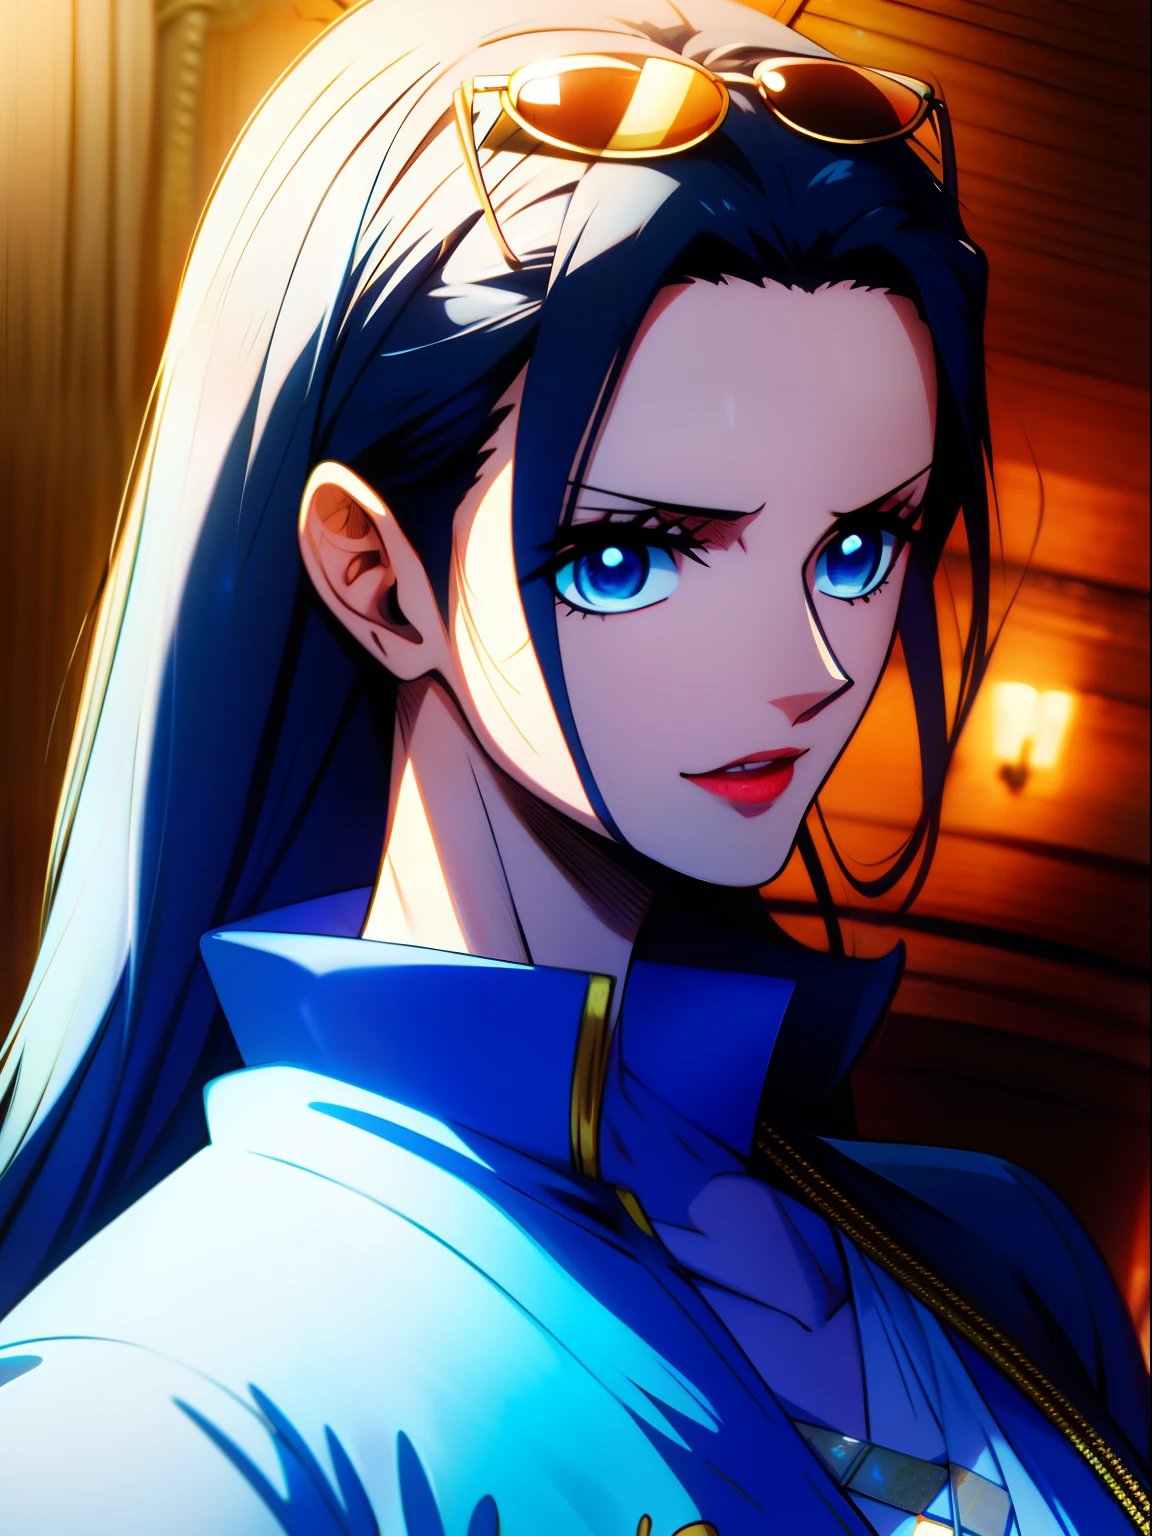 Robin Nicobar From One-piece , blue blows , blue transperent Sunglasses on her he , long hair , blue eyes , red lips , gold hearing on her hearing, hyper realistic Detailed high quality image 4k Image